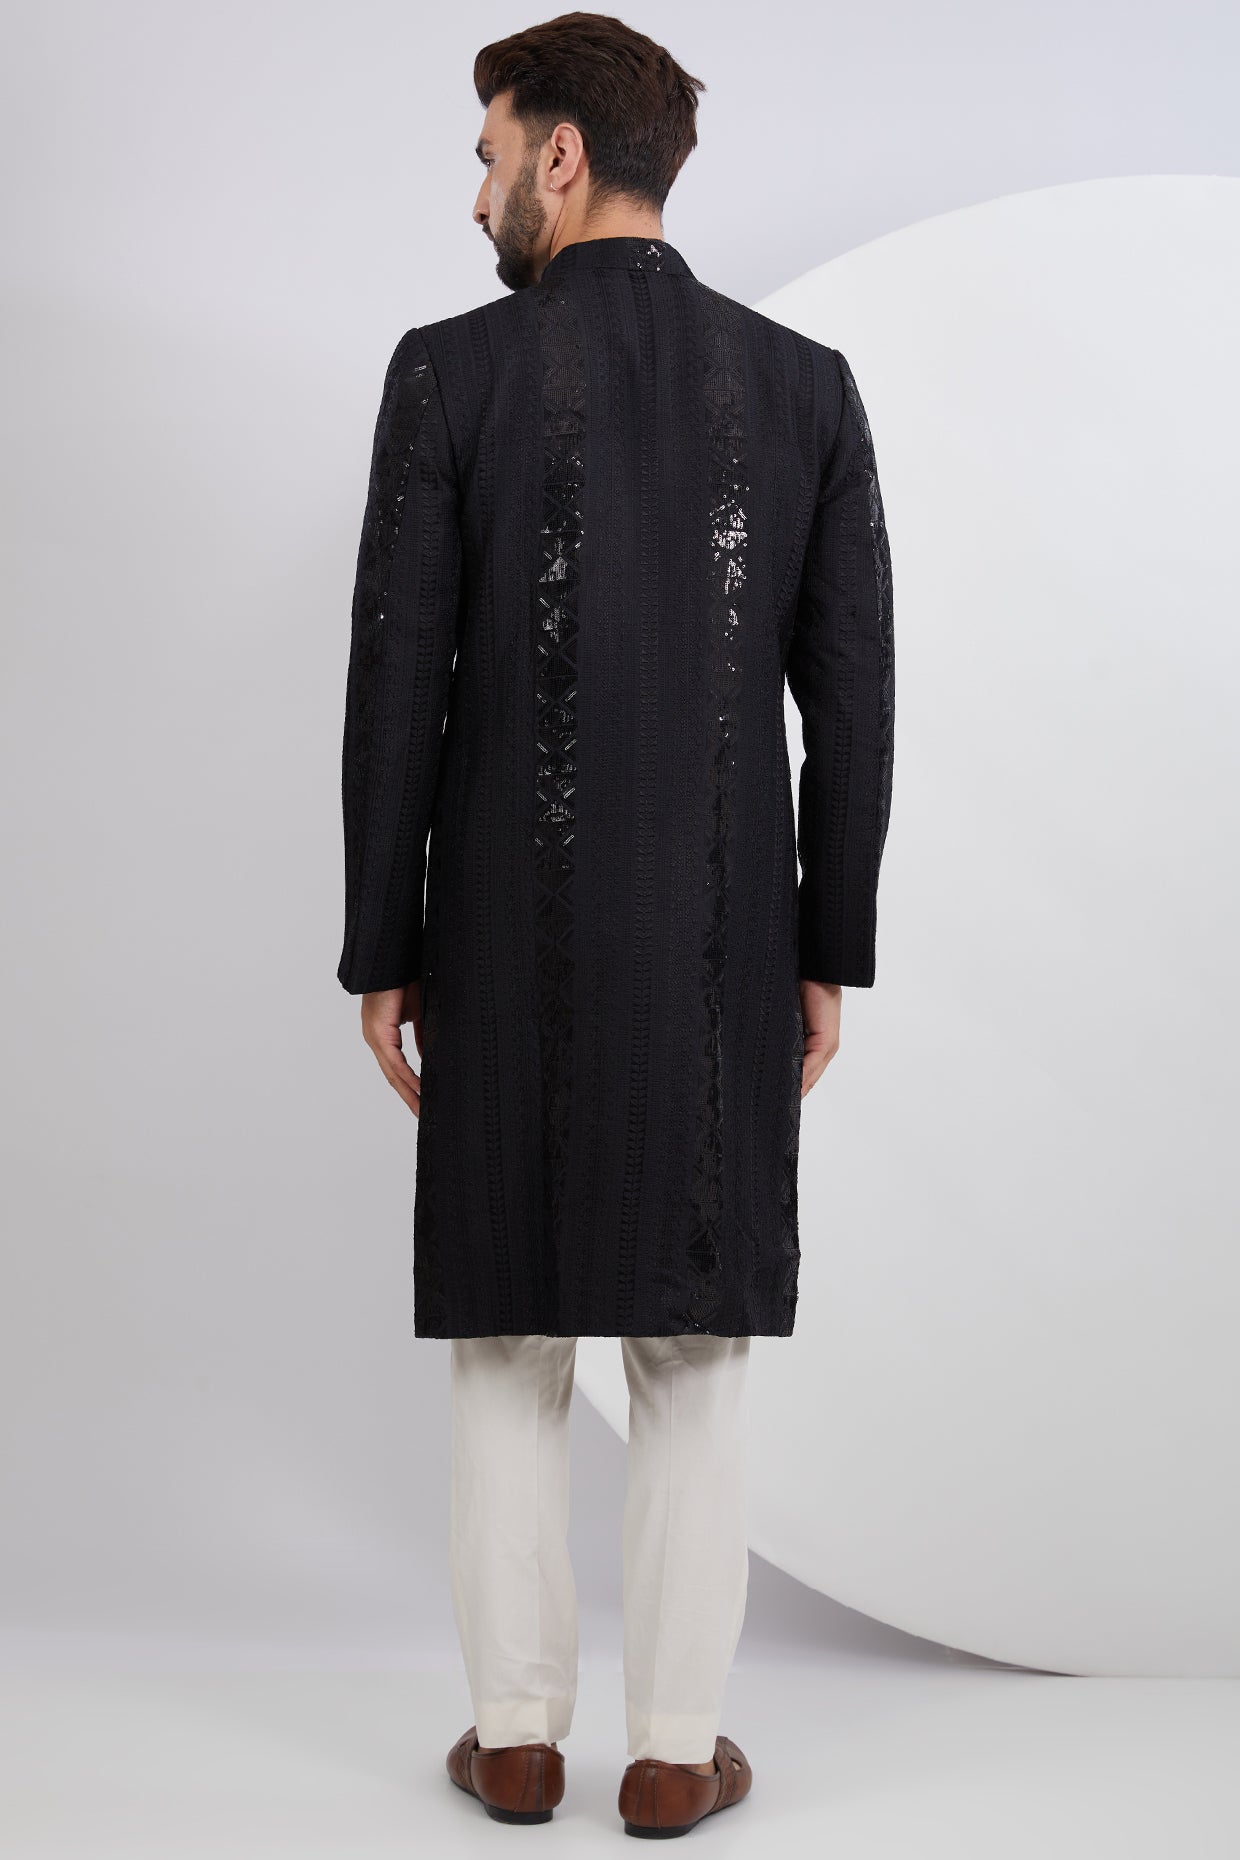 Signature Black Embroidered Sherwani with Intricate Sequins